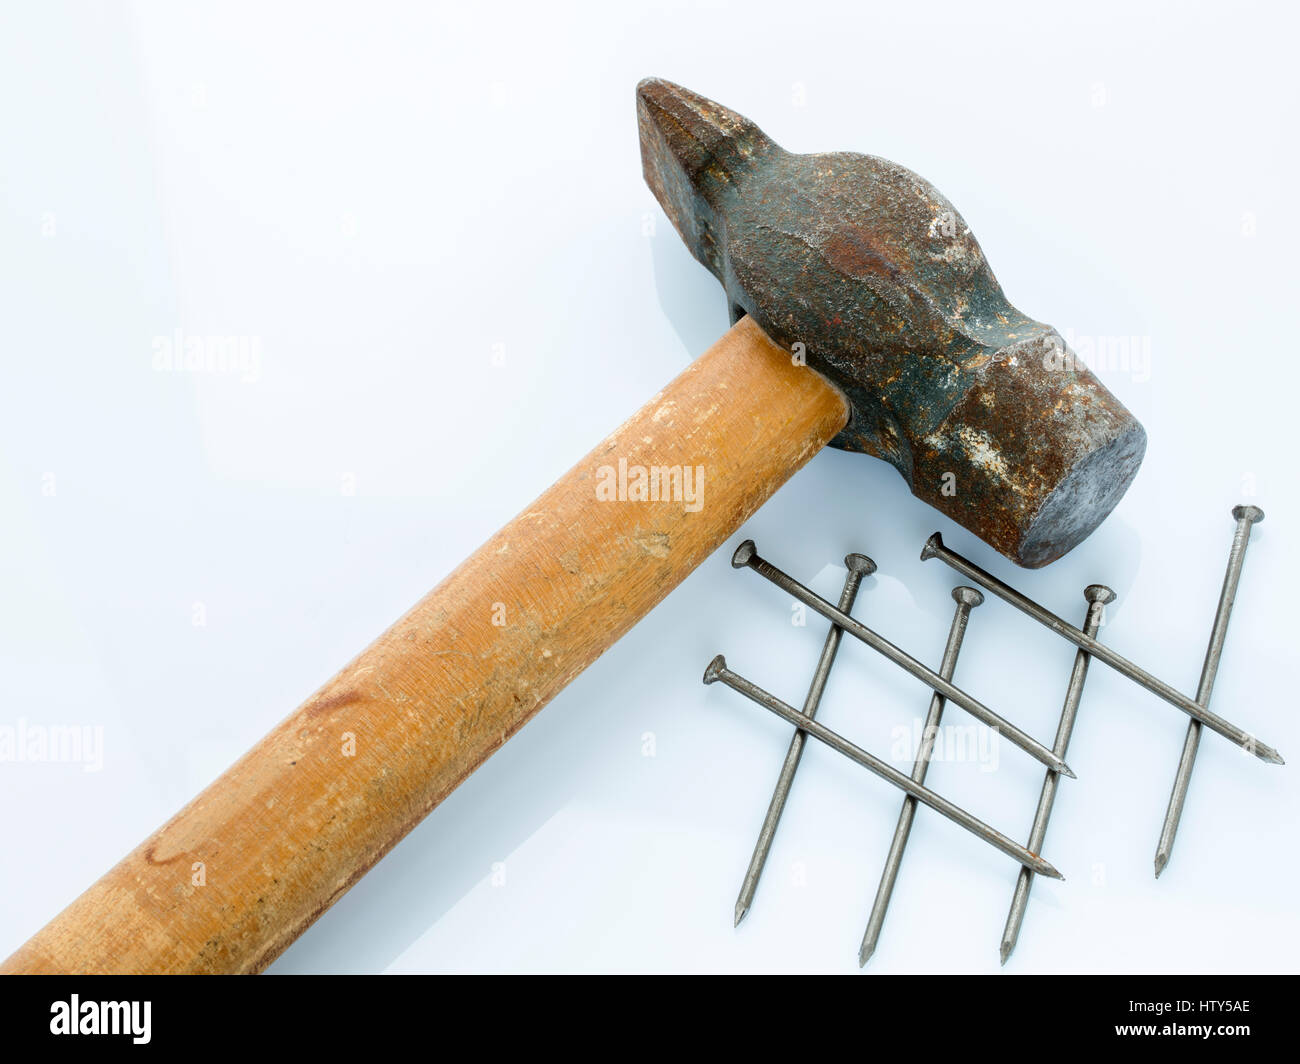 An old hammer with a wooden handle and a bunch of nails. Objects on a light background Stock Photo